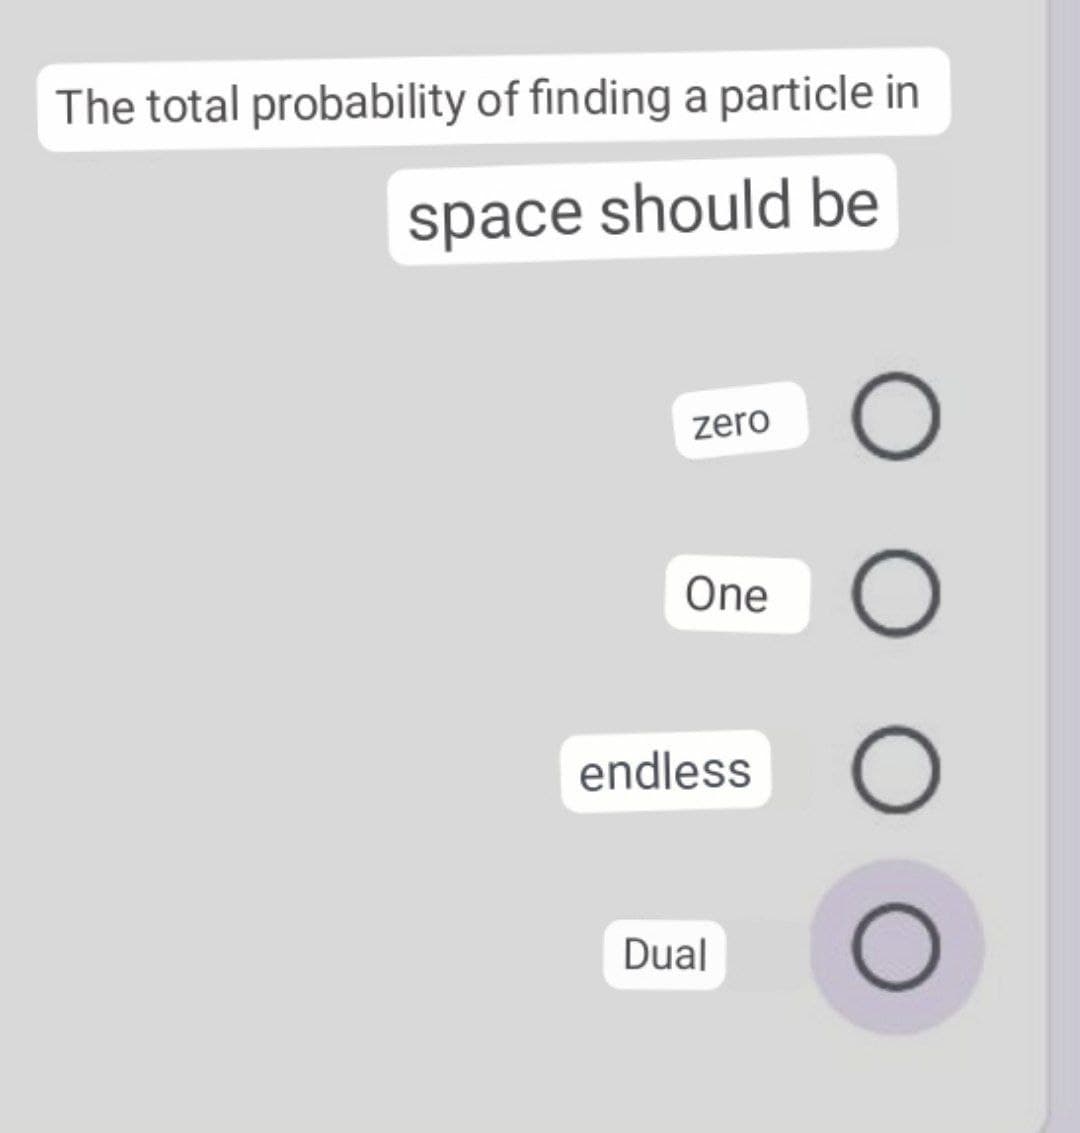 The total probability of finding a particle in
space should be
zero
One
endless
Dual
